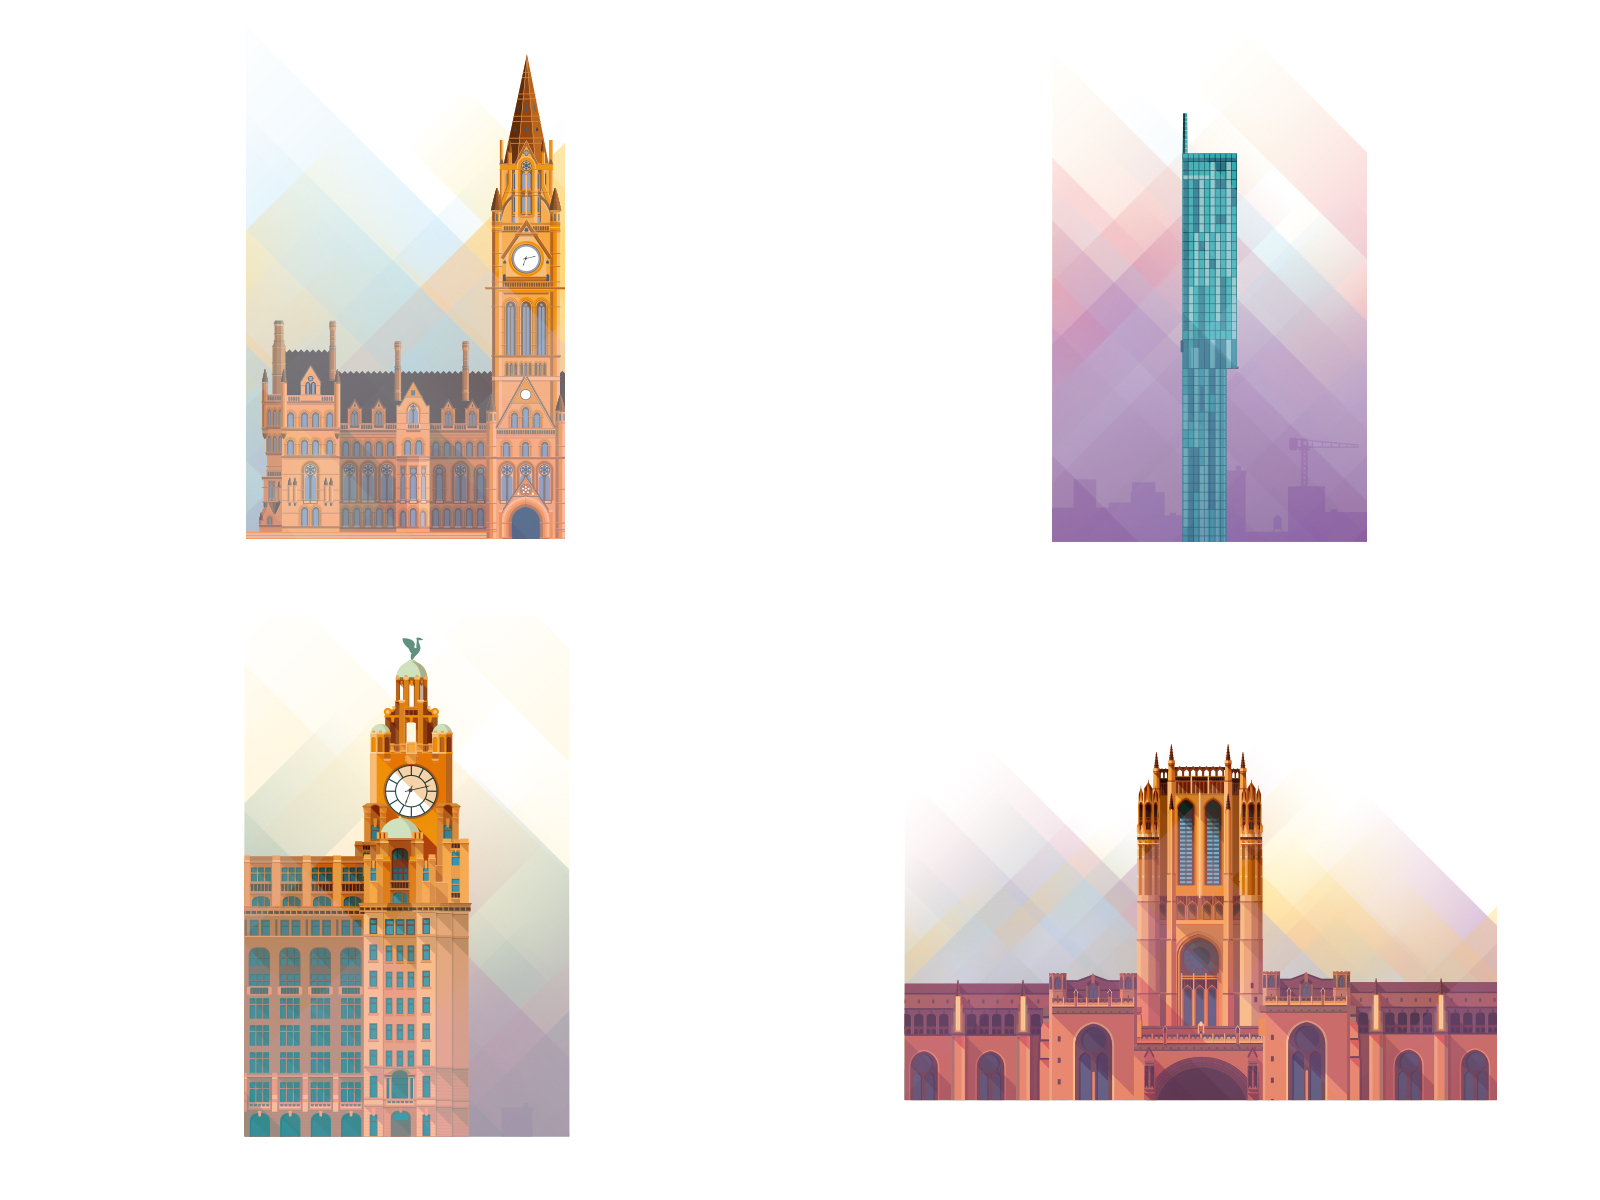 2018 2018 architecture building illustration liverpool manchester top 4 vector